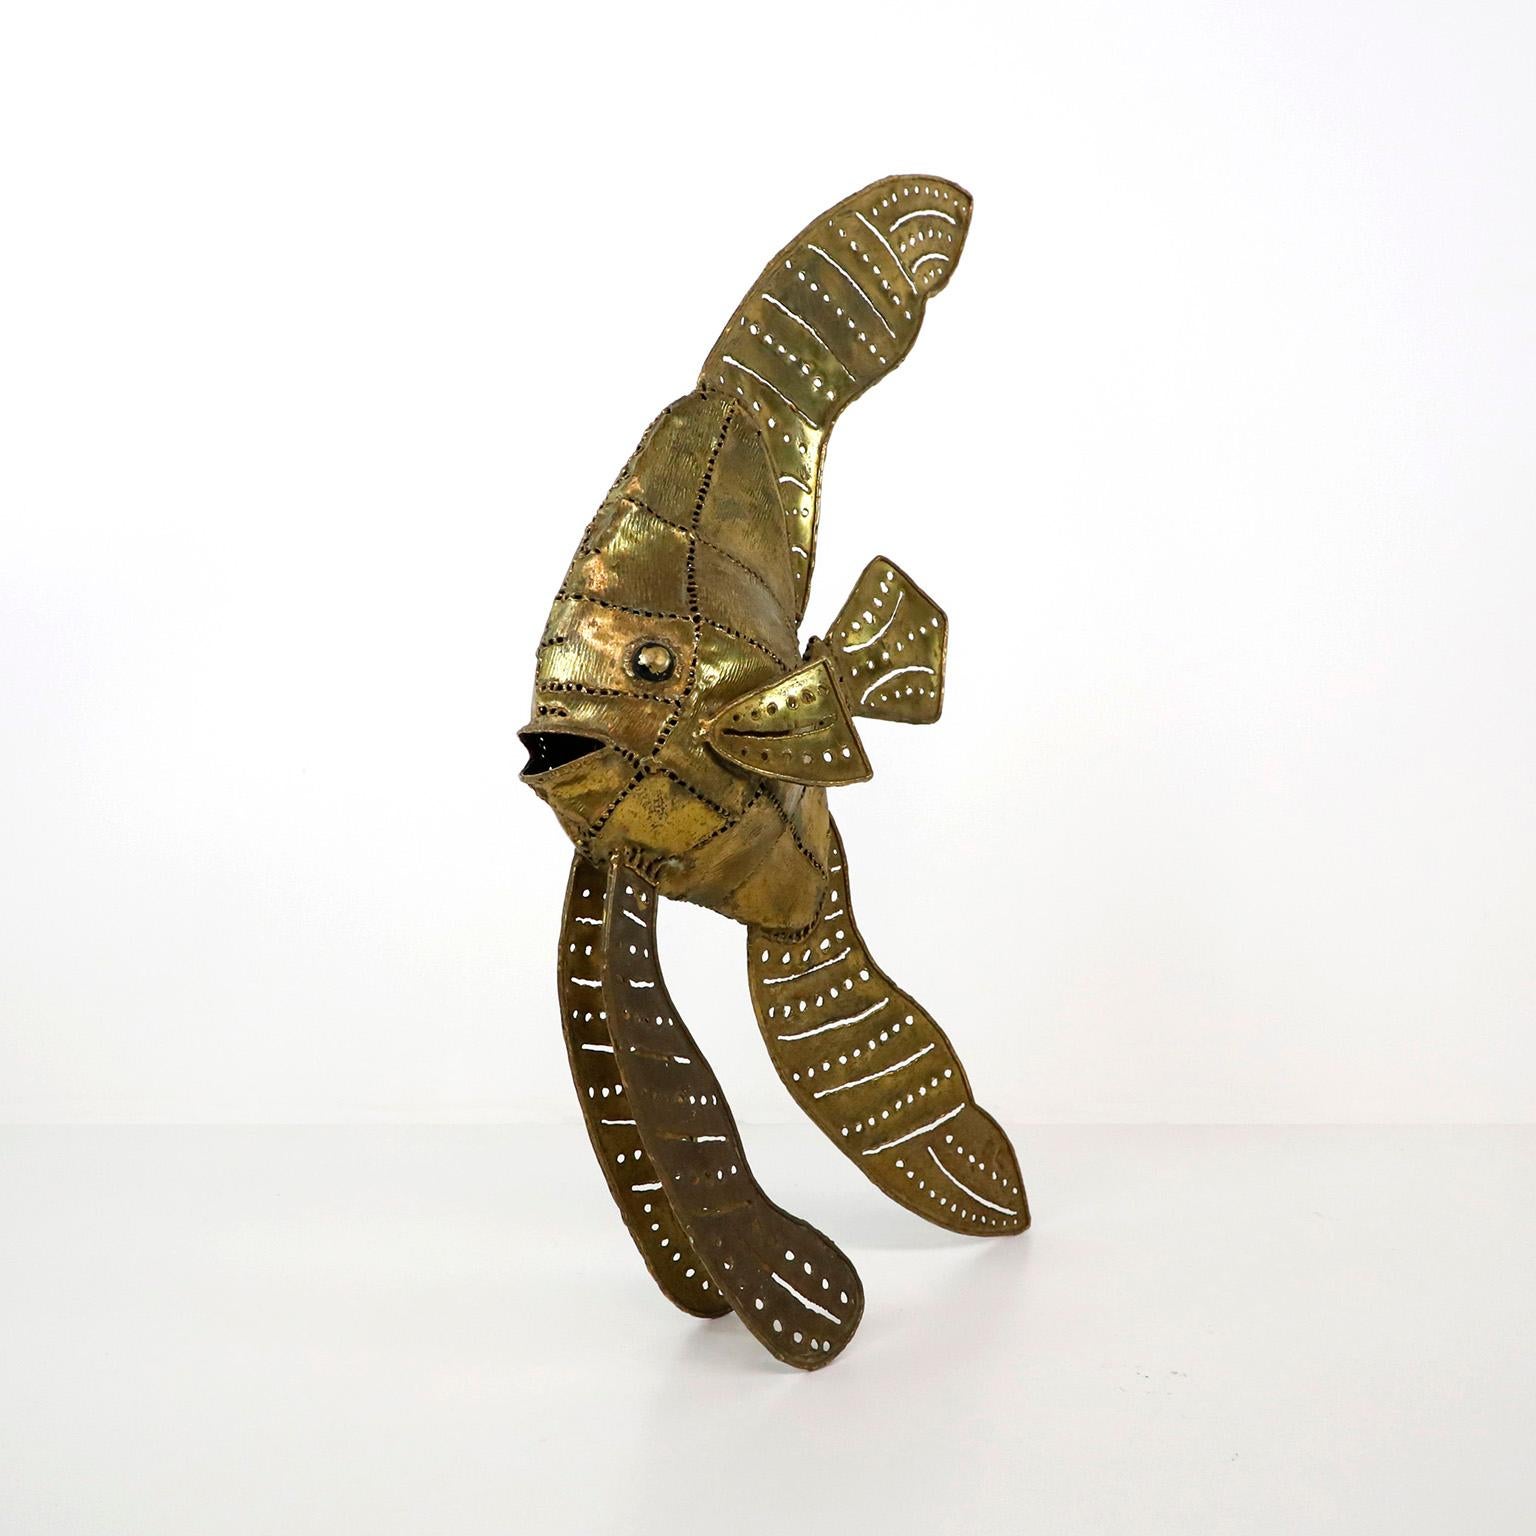 Circa 1970. We offer this Brutalist Fish sculpture made in Brass.